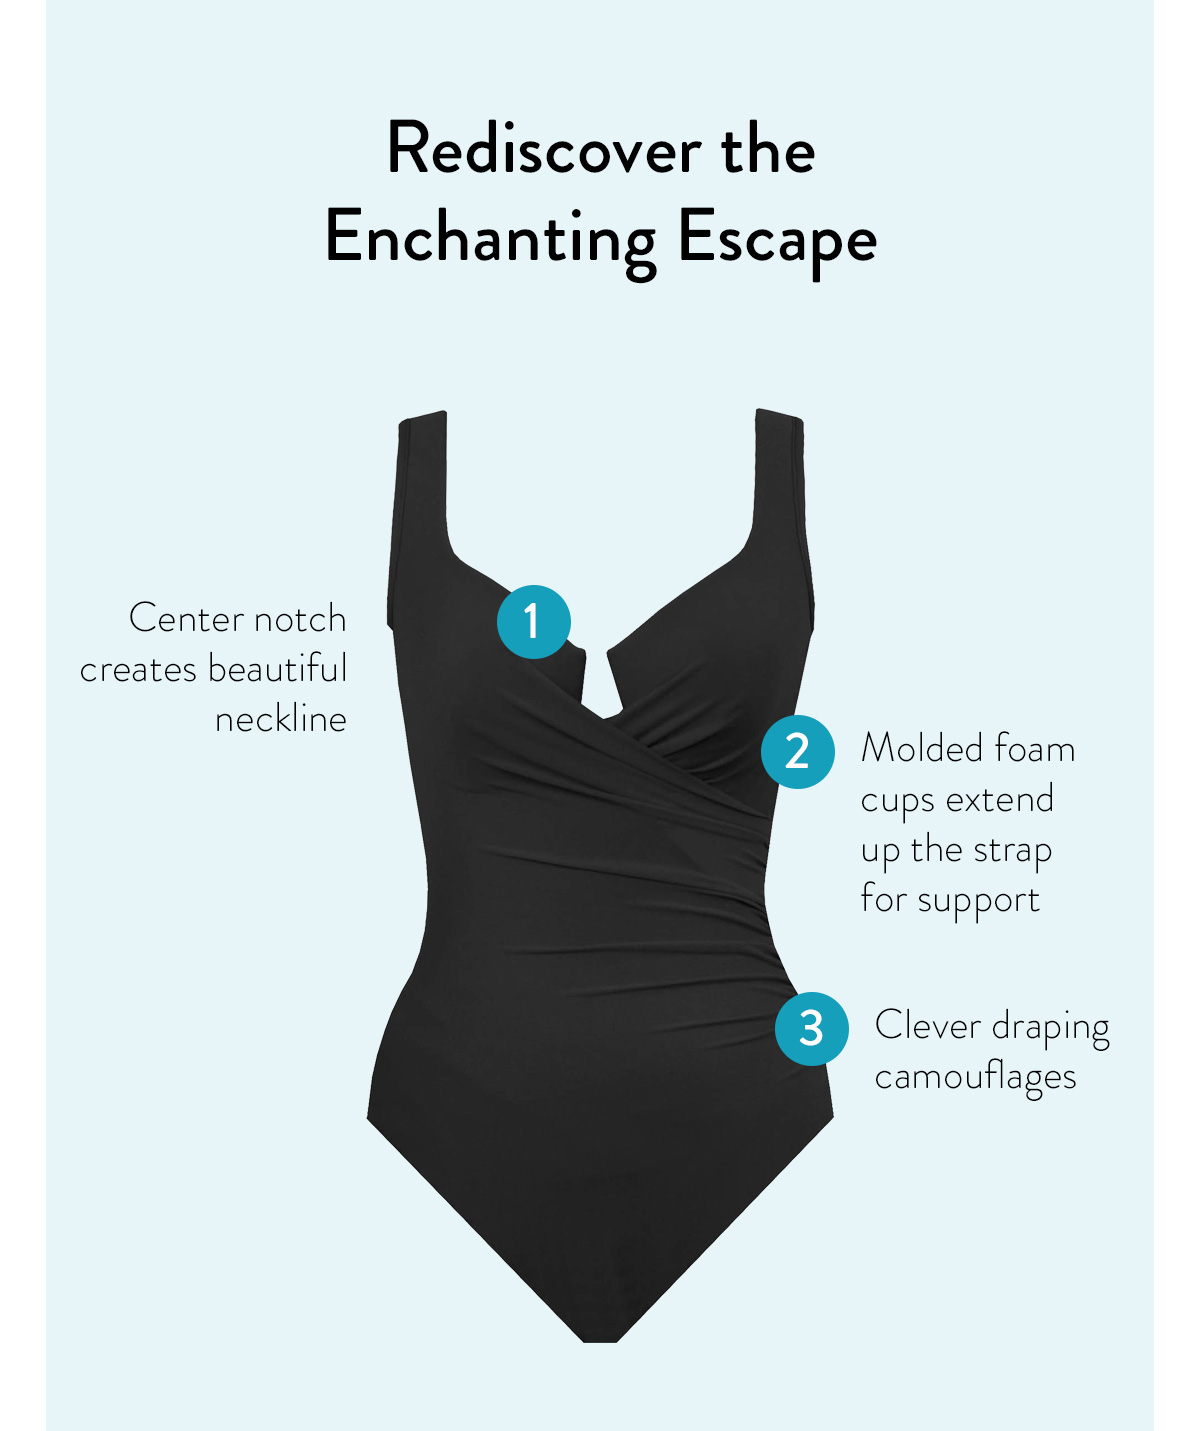 Rediscover the Enchanting Escape 1 - Scalloped, supportive neckline 2 - Mid-shirring conceals flaws 3 - Underwire Molded Cup Bra